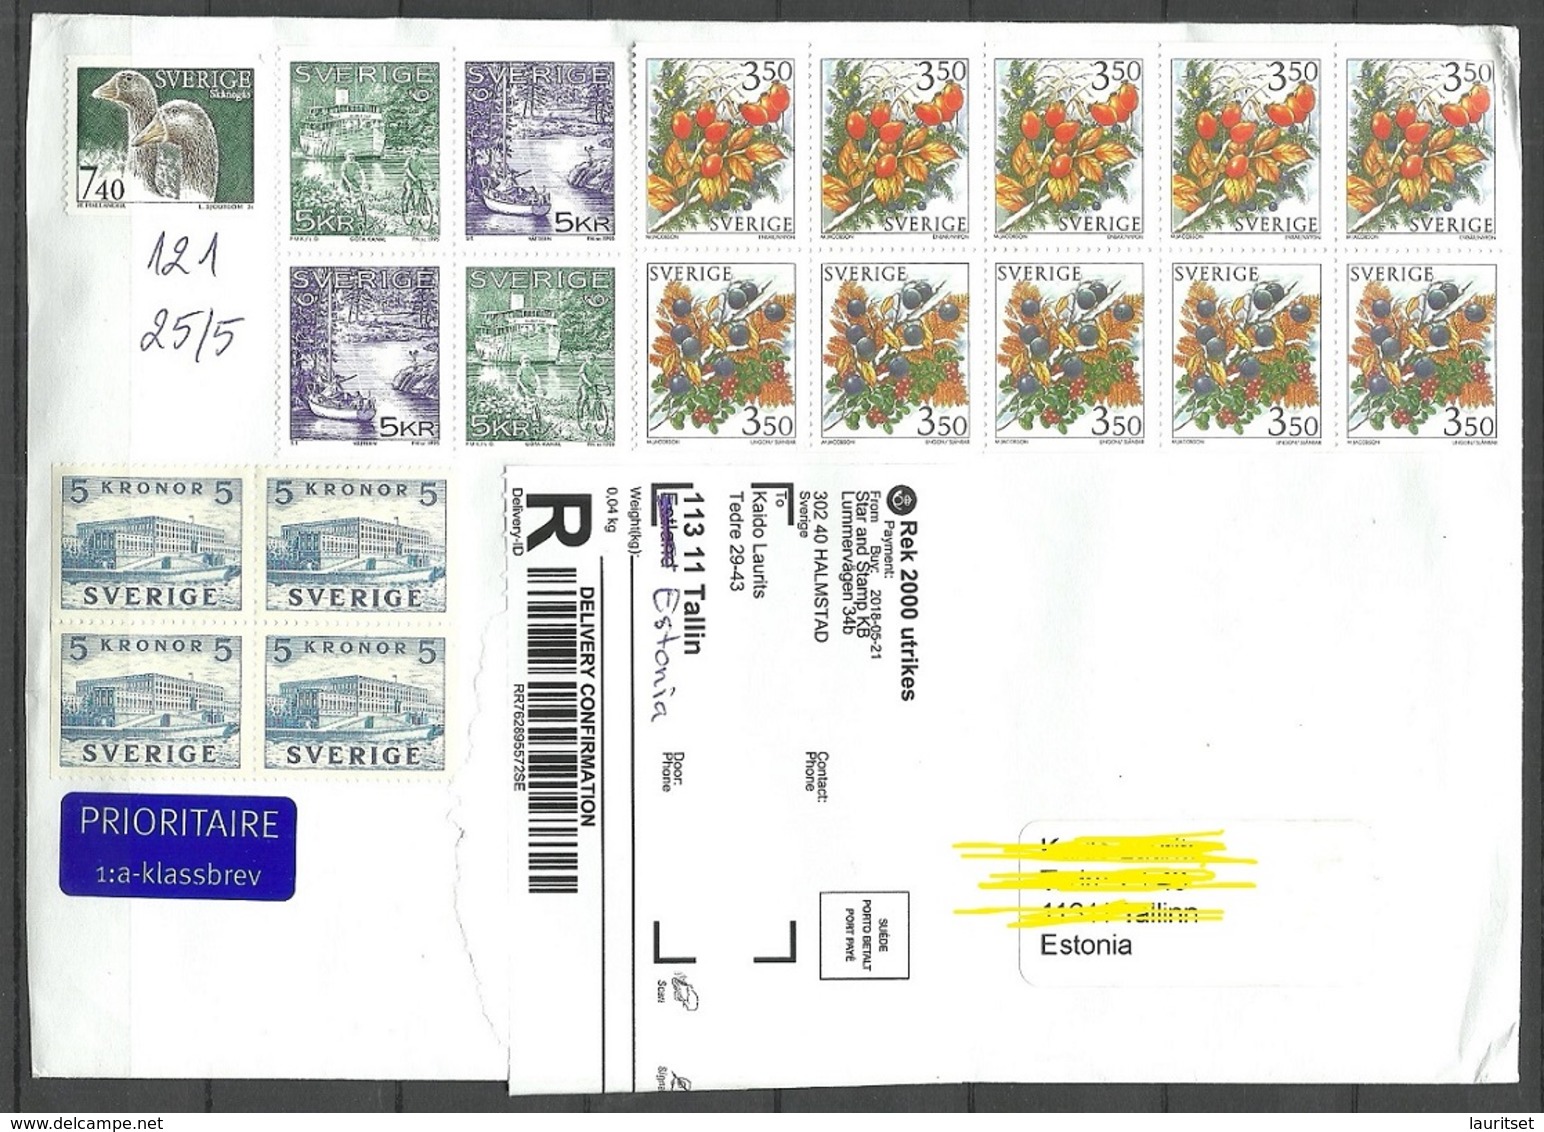 SCHWEDEN Sweden 2018 Registered Cover To Estonia Stamps Remained Unused (not Canceled) - Covers & Documents